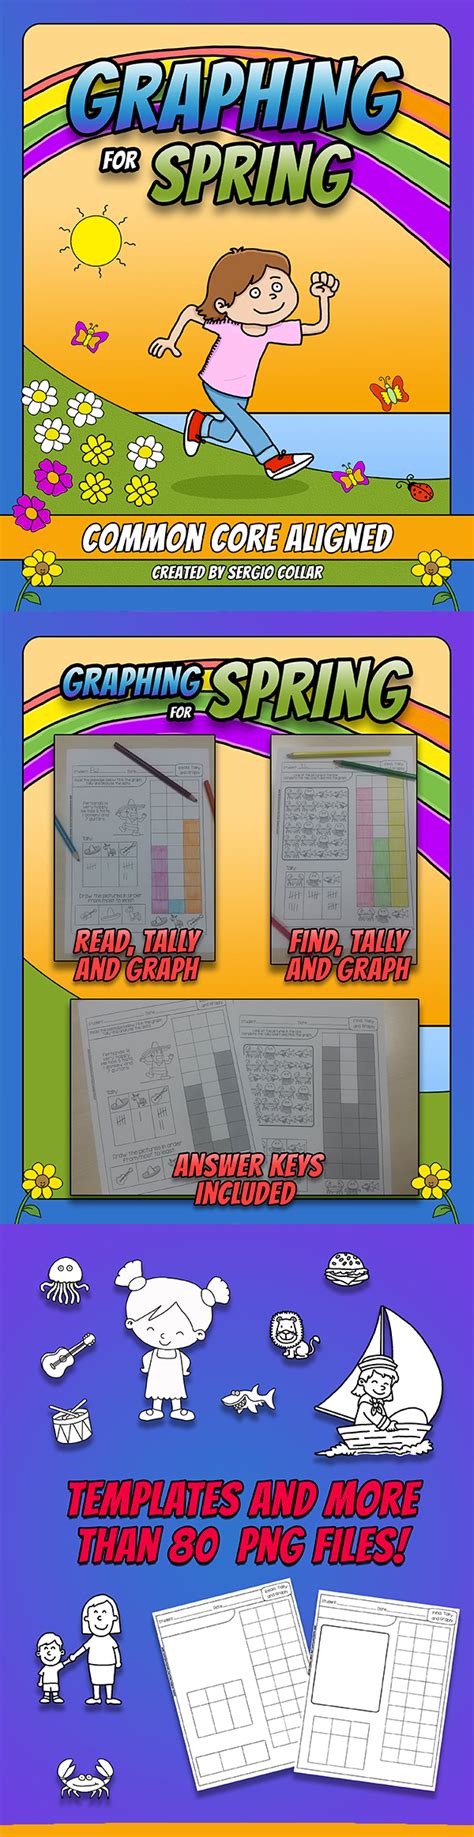 Graphing For Spring Common Core Aligned 1md4 2md10 Aprender